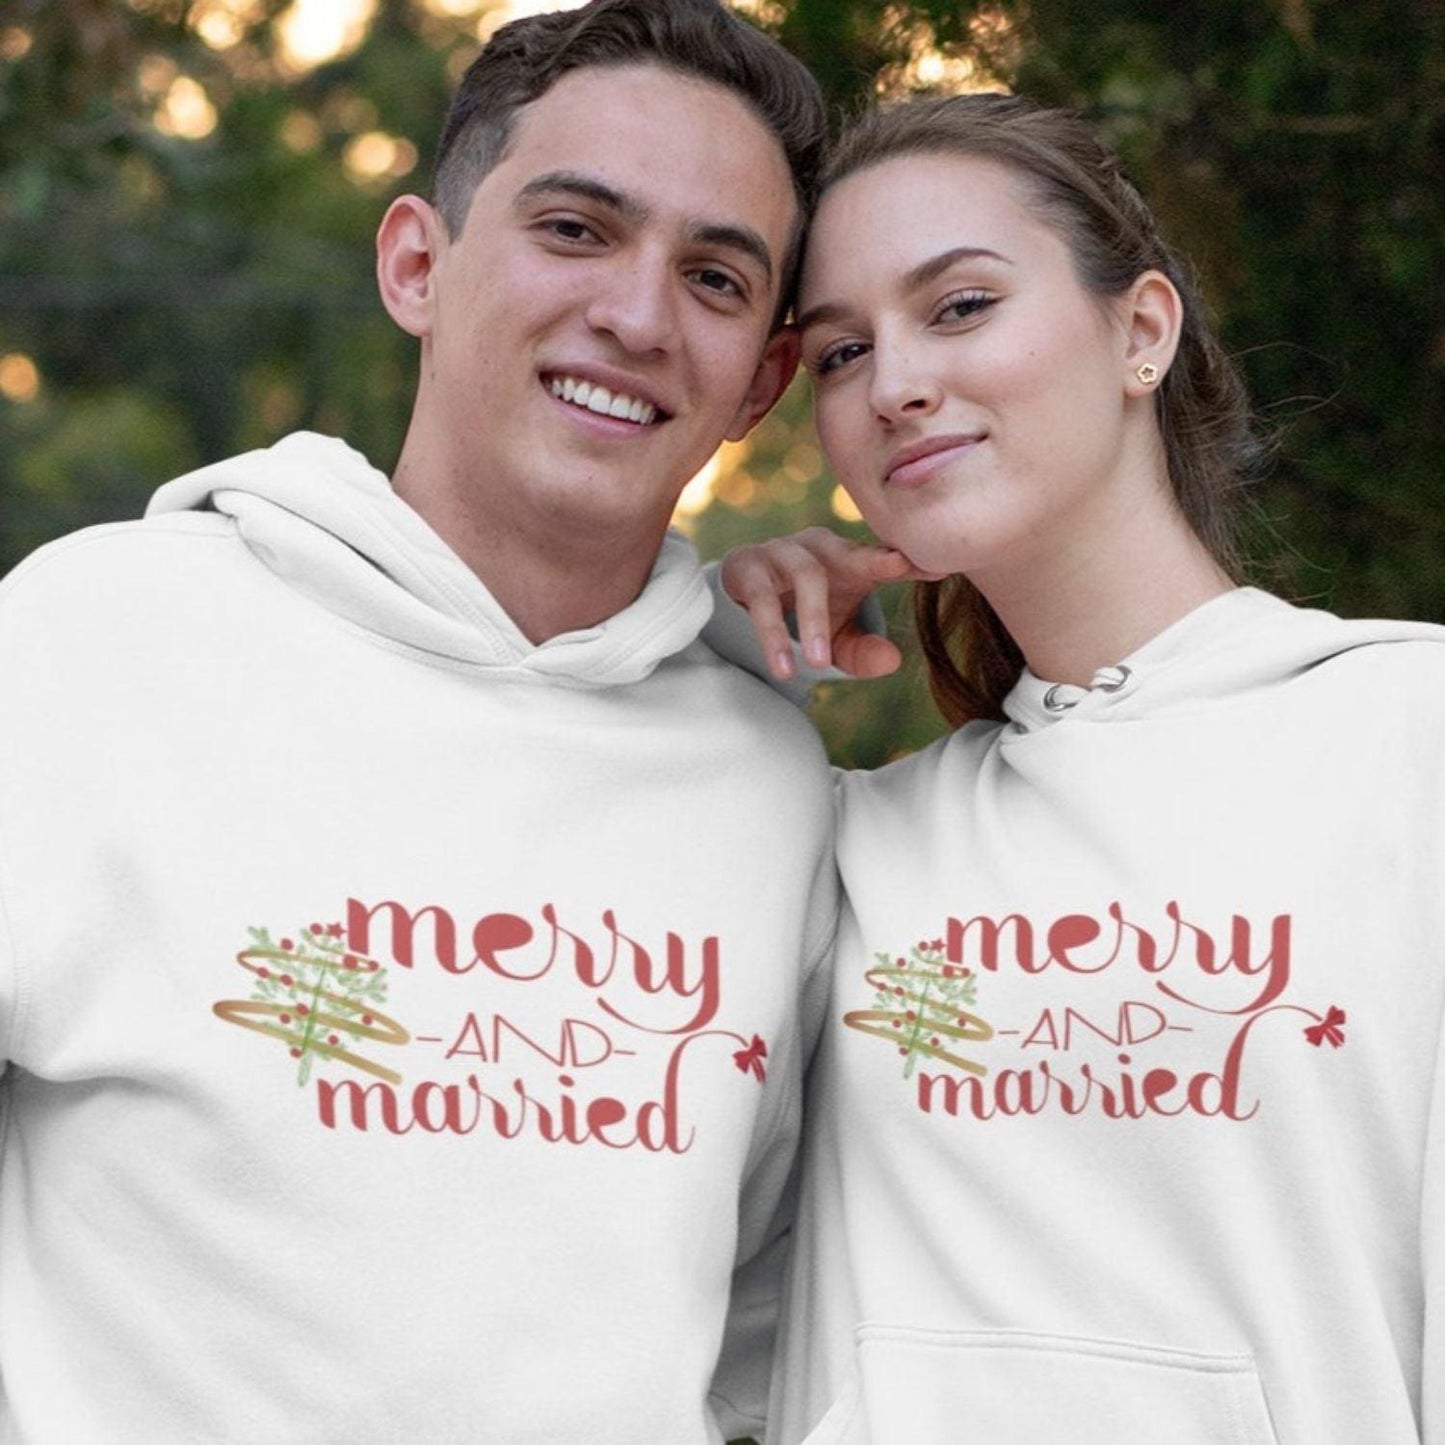 Merry & Married Matching Set: Personalized Couples Xmas Outfit, Hilarious Newlywed Holiday Gift - 4Lovebirds